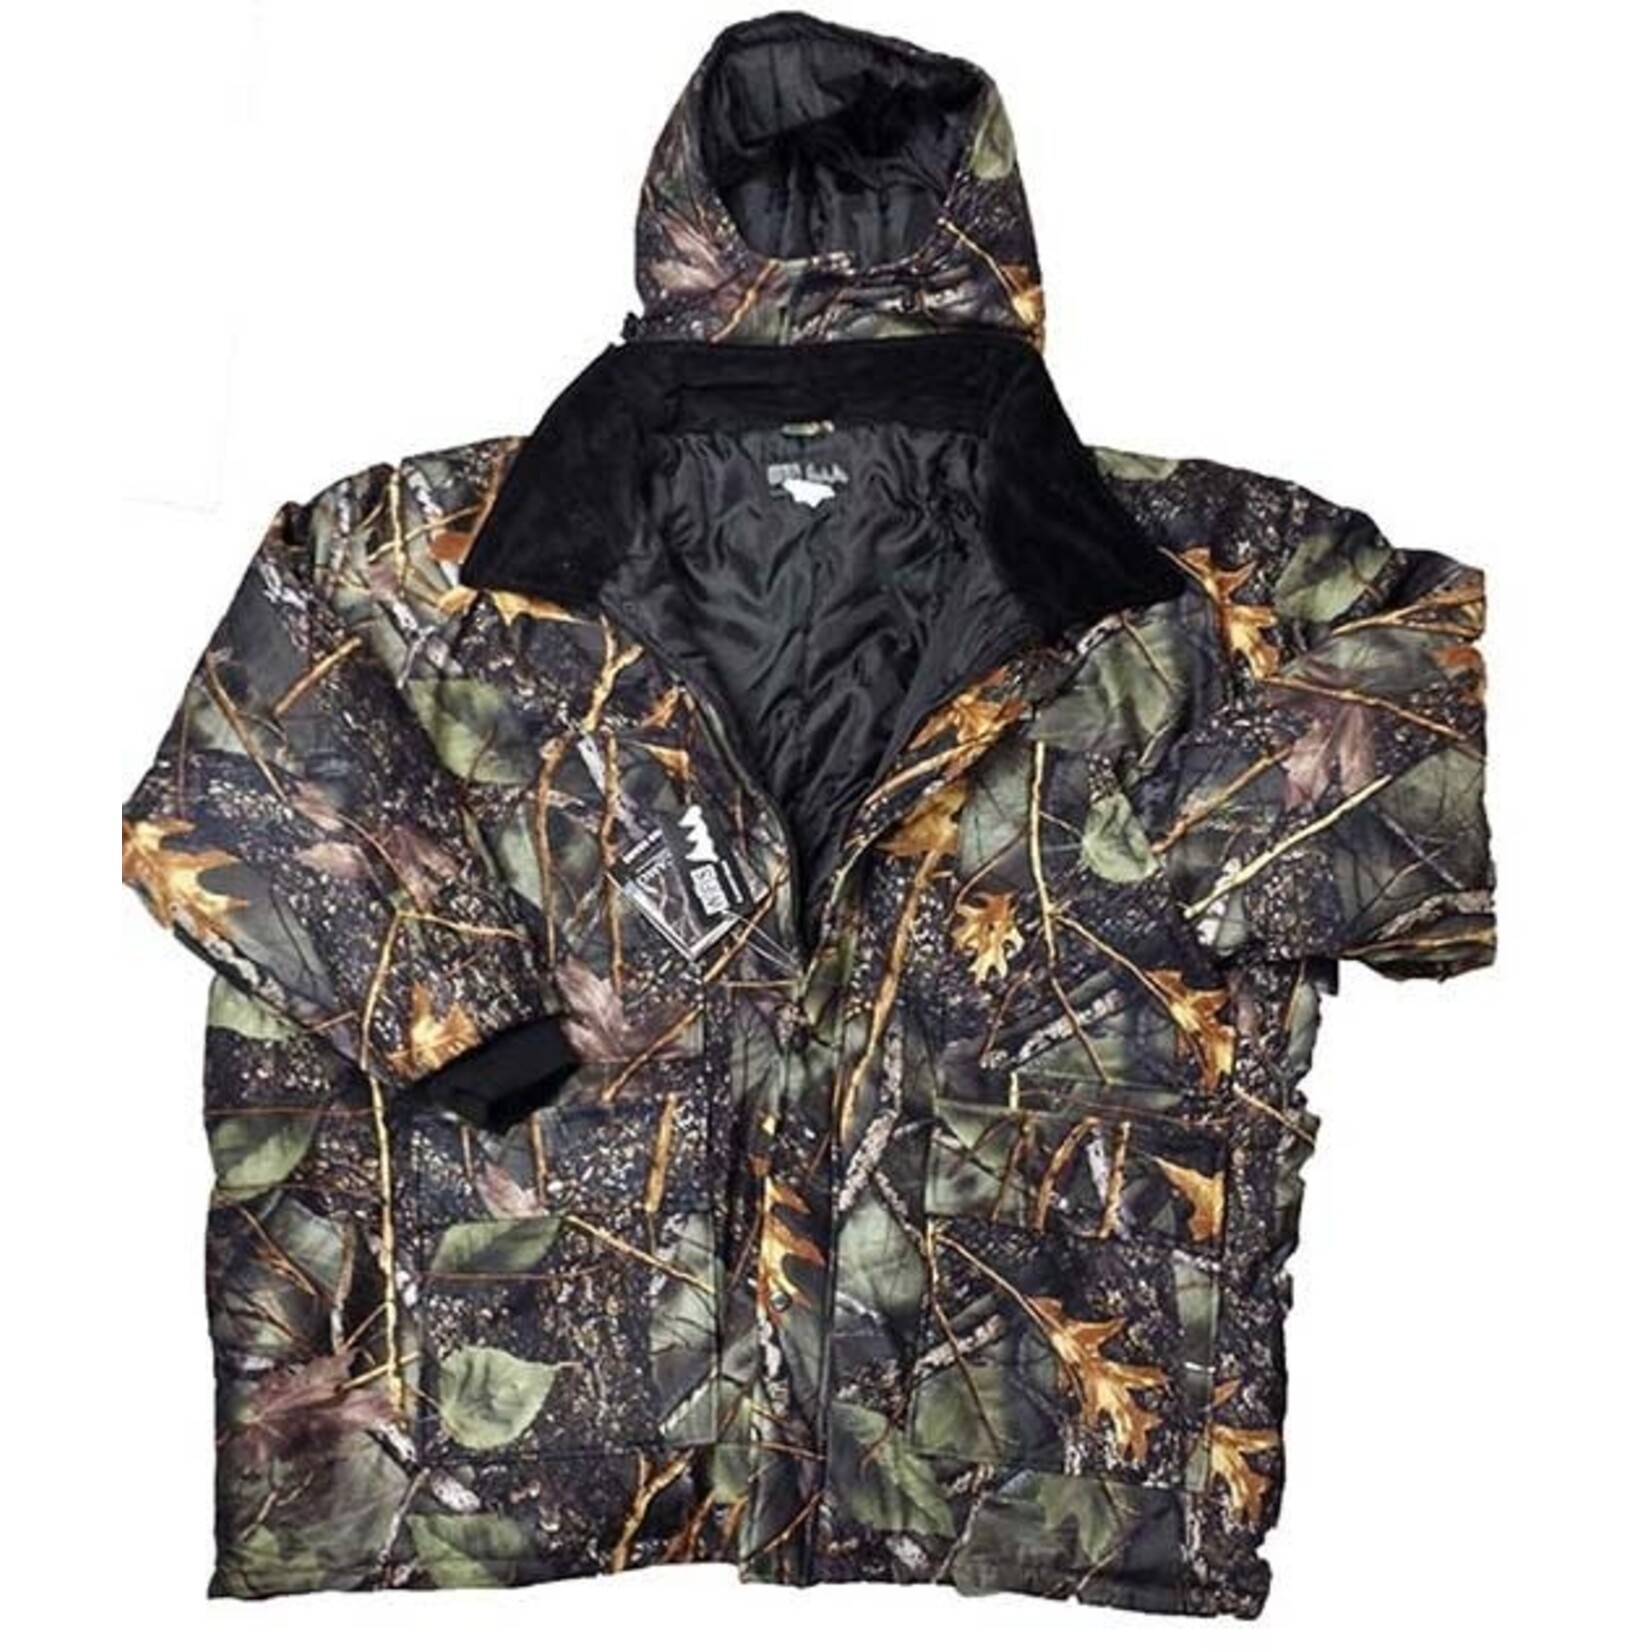 Yukon Gear Men's Insulated Water-Resistant Windproof Hunting